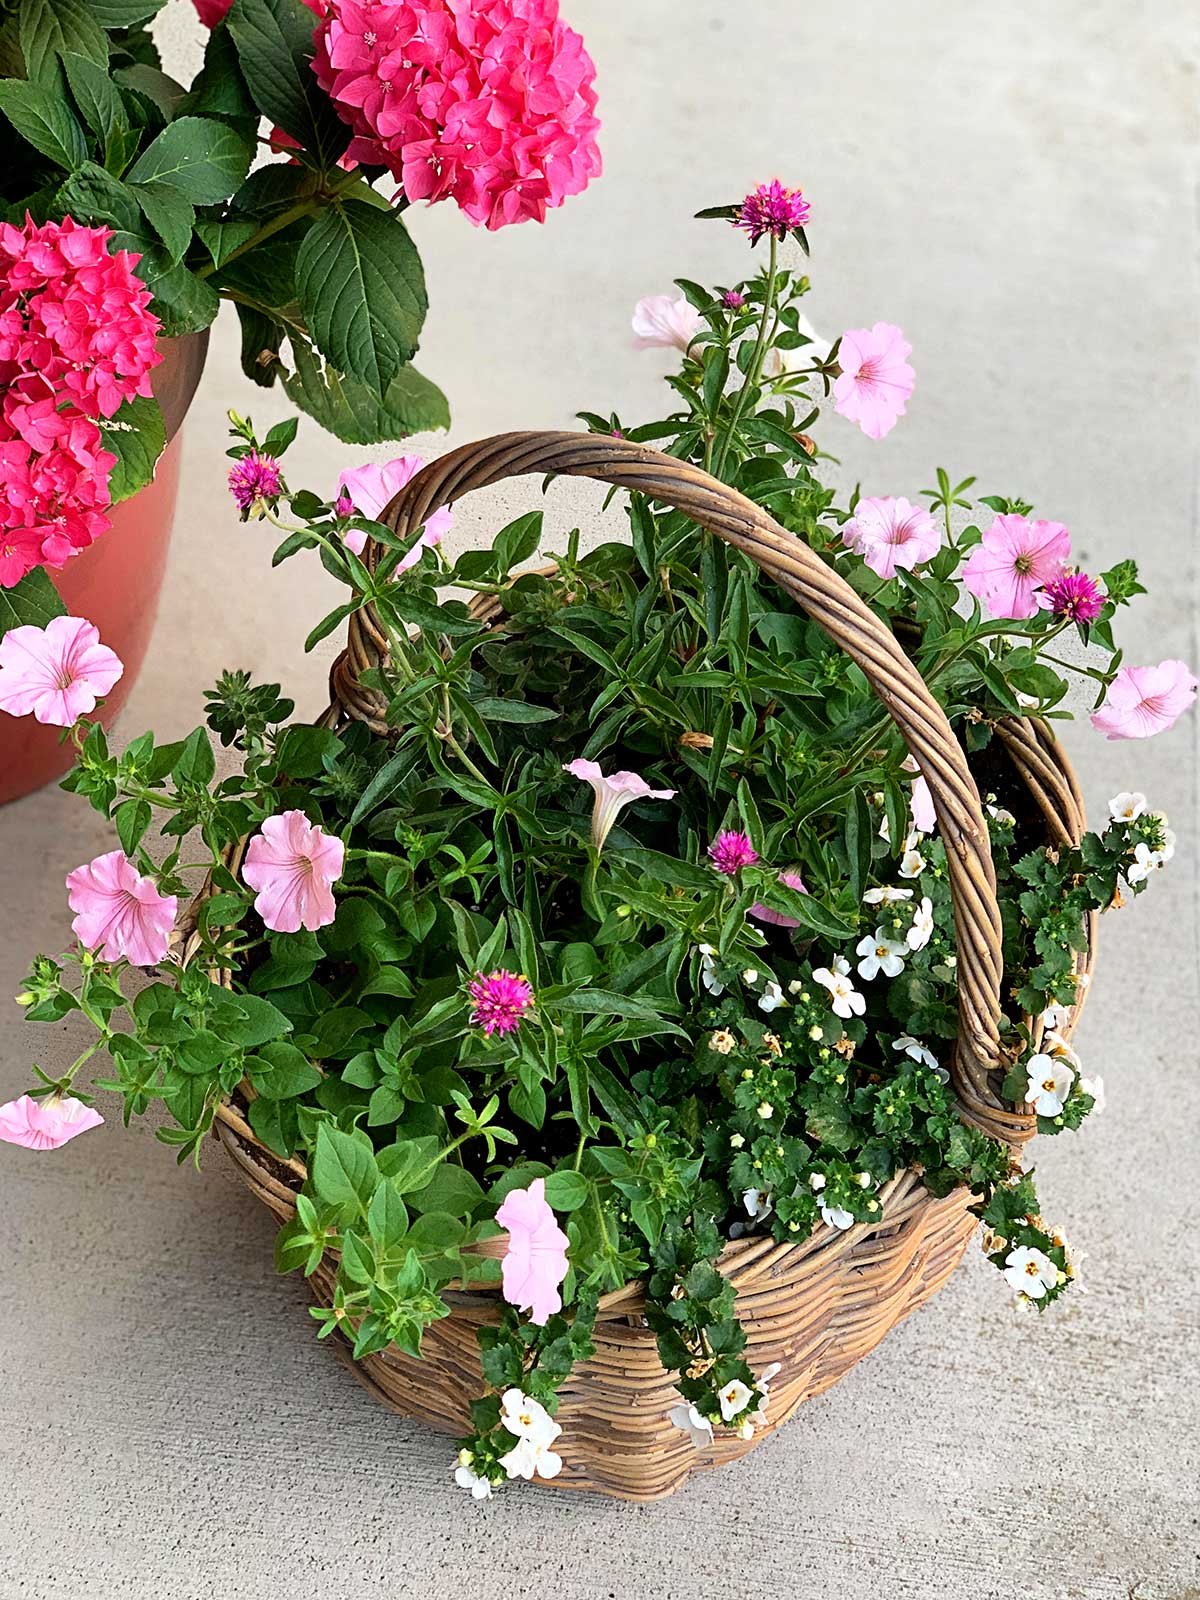 Gomphrena, Supertunia, Dwarf Morning Glory and Bacopa mixed container planted in a thrift store basket.